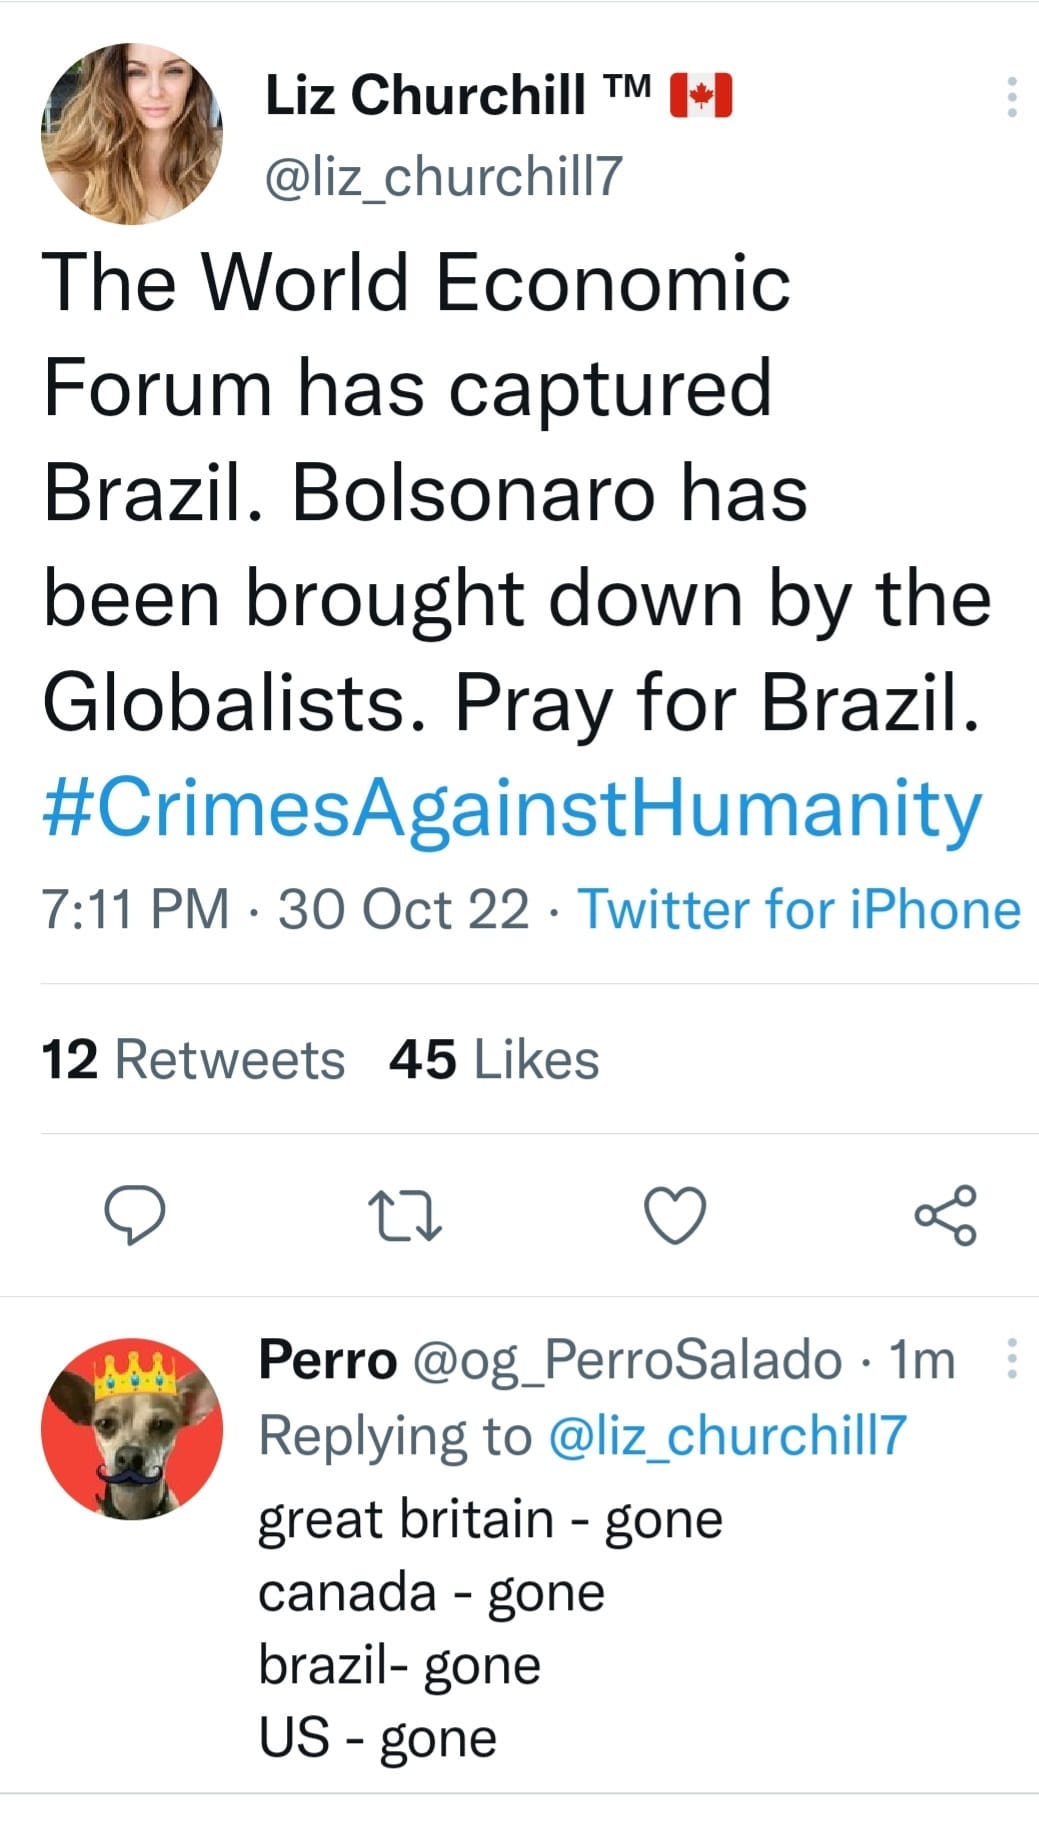 May be a Twitter screenshot of 1 person and text that says 'Liz Churchill TM @liz_churchill7 The World Economic Forum has captured Brazil. Bolsonaro has been brought down by the Globalists. Pray for Brazil. #CrimesAgainstHumanity 7:11 PM 30 Oct 22 Twitter for iPhone 12 Retweets 45 Likes Perro @og_PerroSalado 1m Replying to @liz_churchill7 great britain- gone canada- gone brazil- gone US- gone'